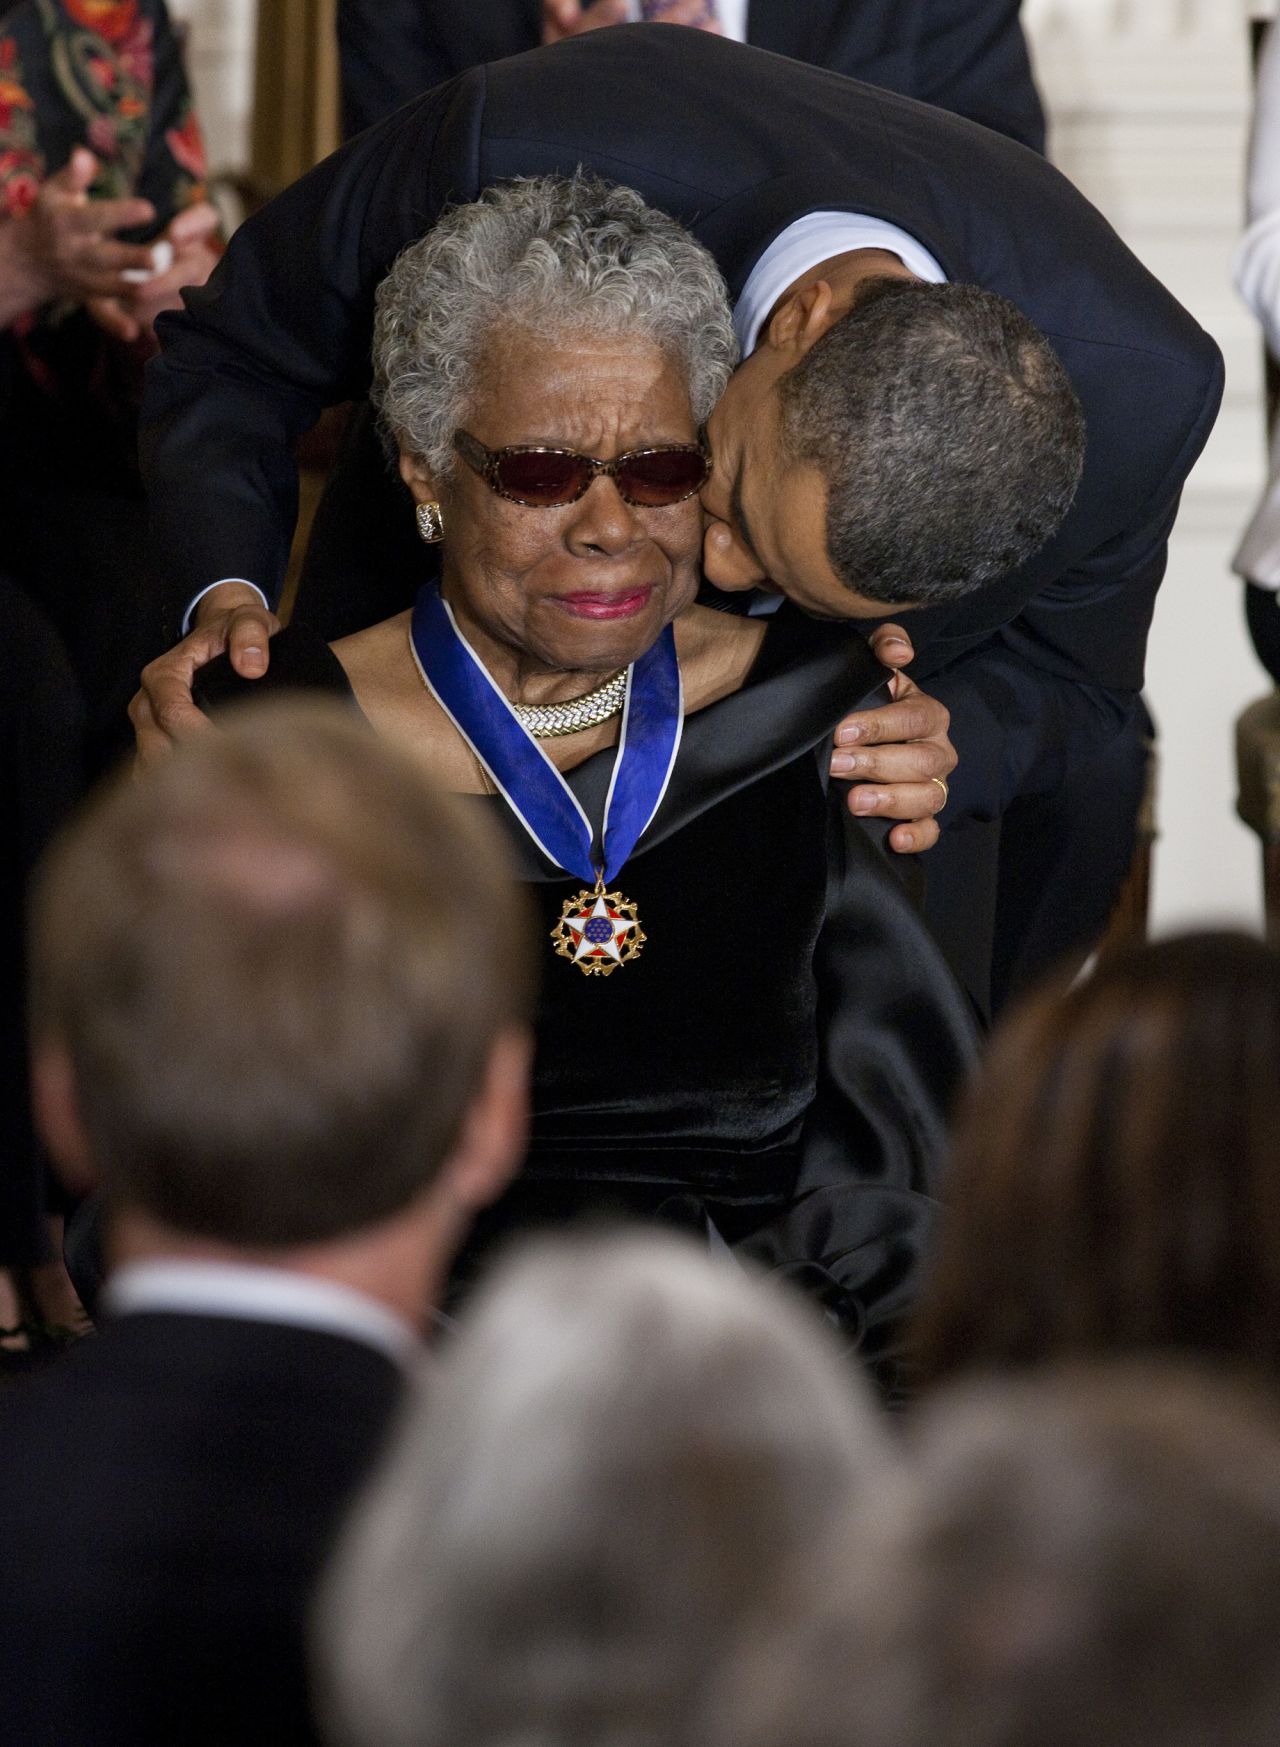 Trailblazing author and poet Maya Angelou spent her career lifting up oppressed voices while breaking down barriers in the literary community. Her book "I Know Why the Caged Bird Sings" challenged the preconceived notions of what Black women could write about in the 1960s, and it became a foundation of student reading lists throughout the United States. Here, Angelou receives the Presidential Medal of Freedom from President Barack Obama in 2010.